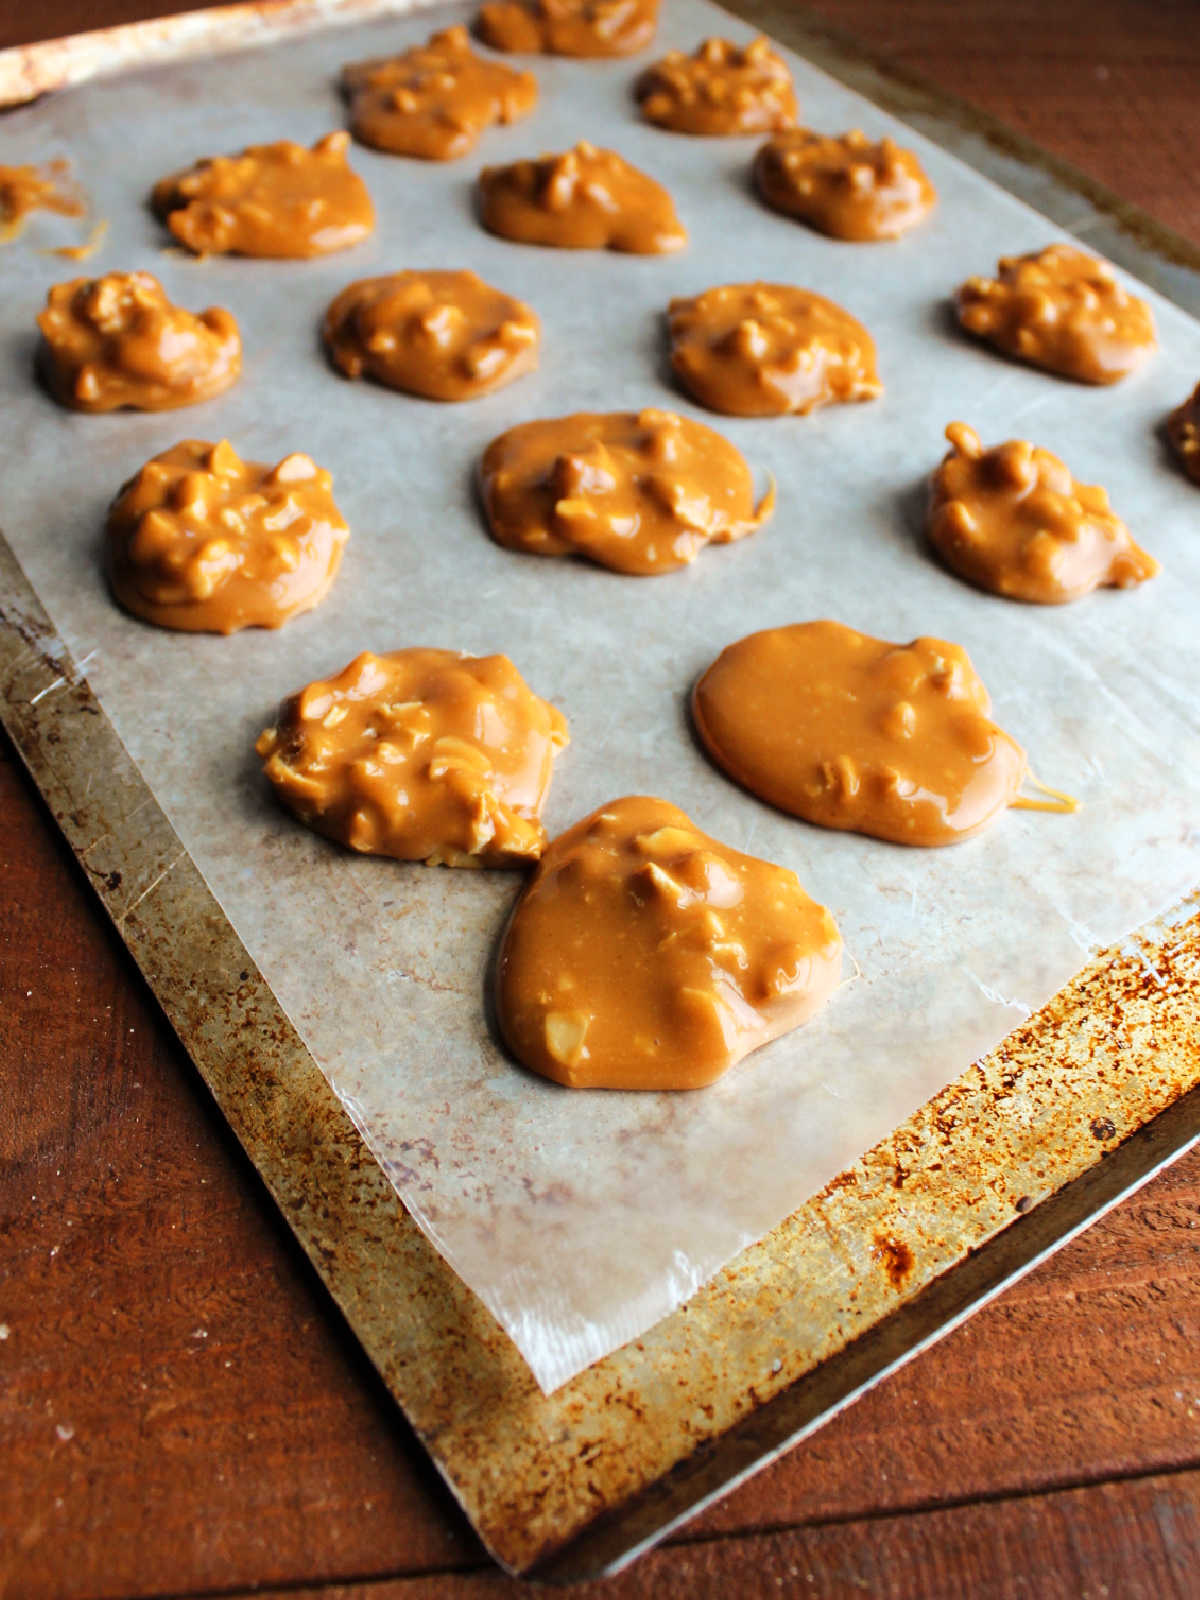 Caramel and cashew centers setting up on wax paper ready to be dipped in chocolate.